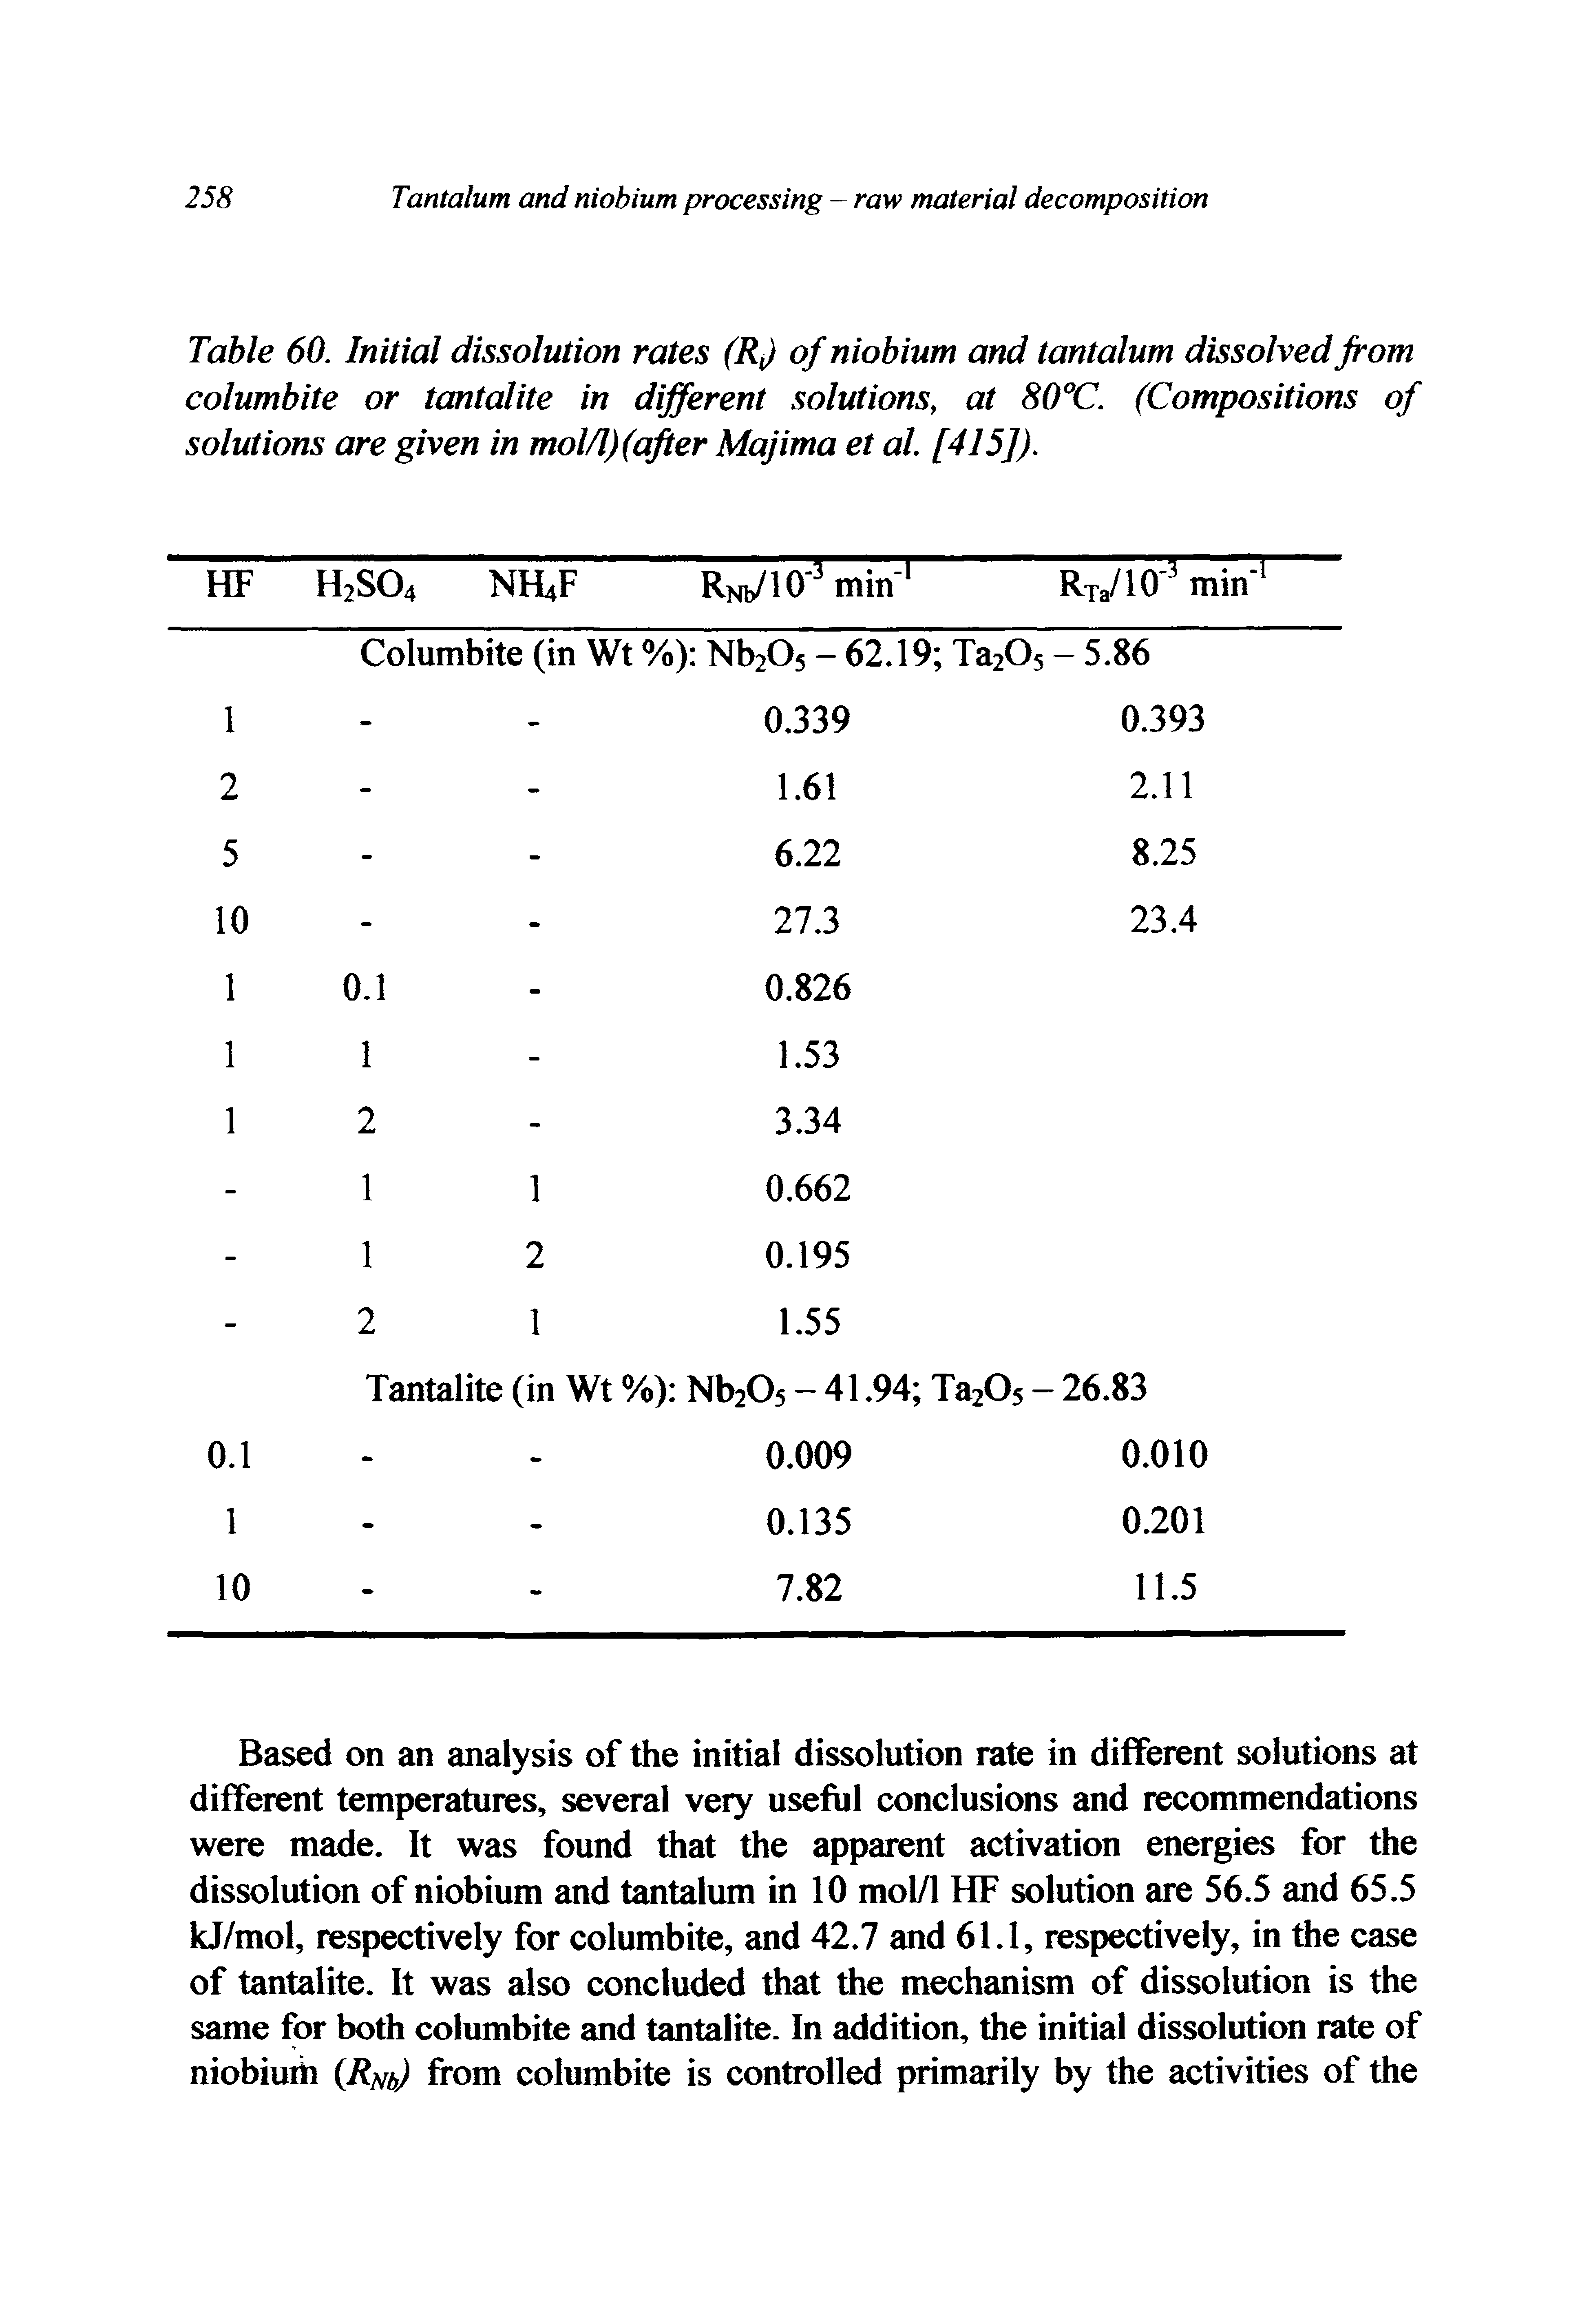 Table 60. Initial dissolution rates (RJ of niobium and tantalum dissolved from columbite or tantalite in different solutions, at 80% . (Compositions of solutions are given in mol/l)(qfter Majima et al. [415]).